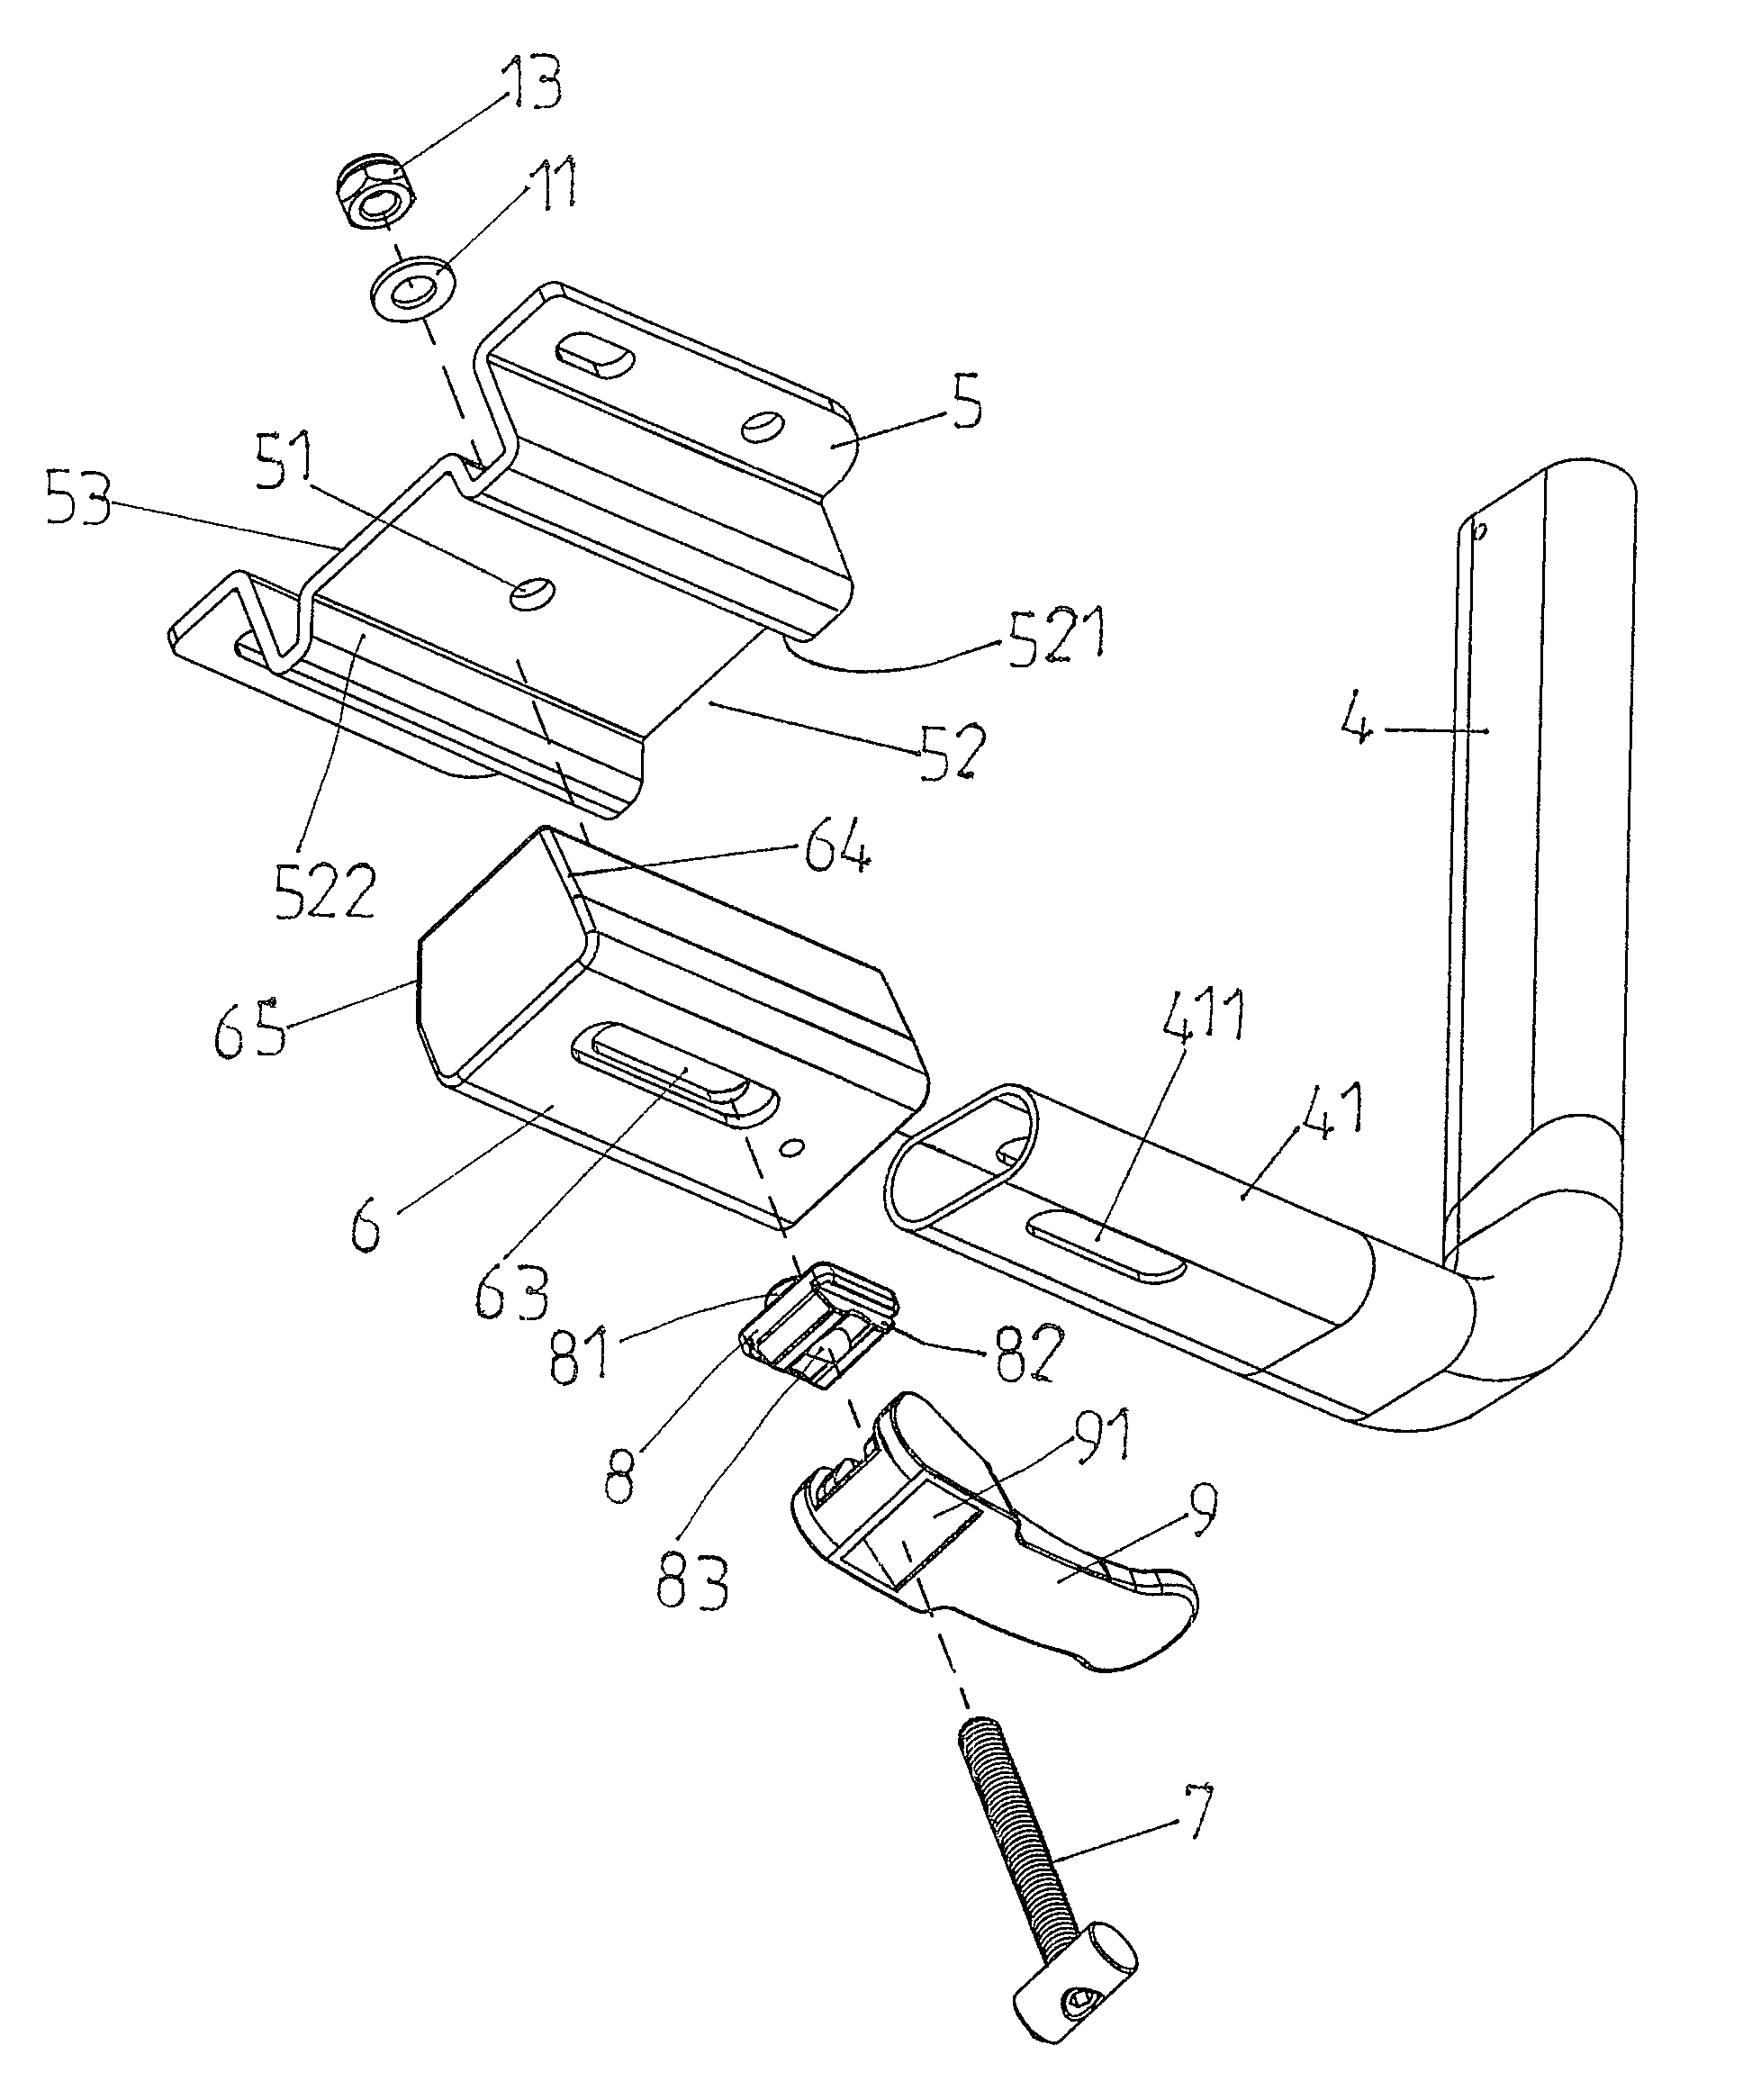 Armrest assembly that can adjust its leftward and rightward positions